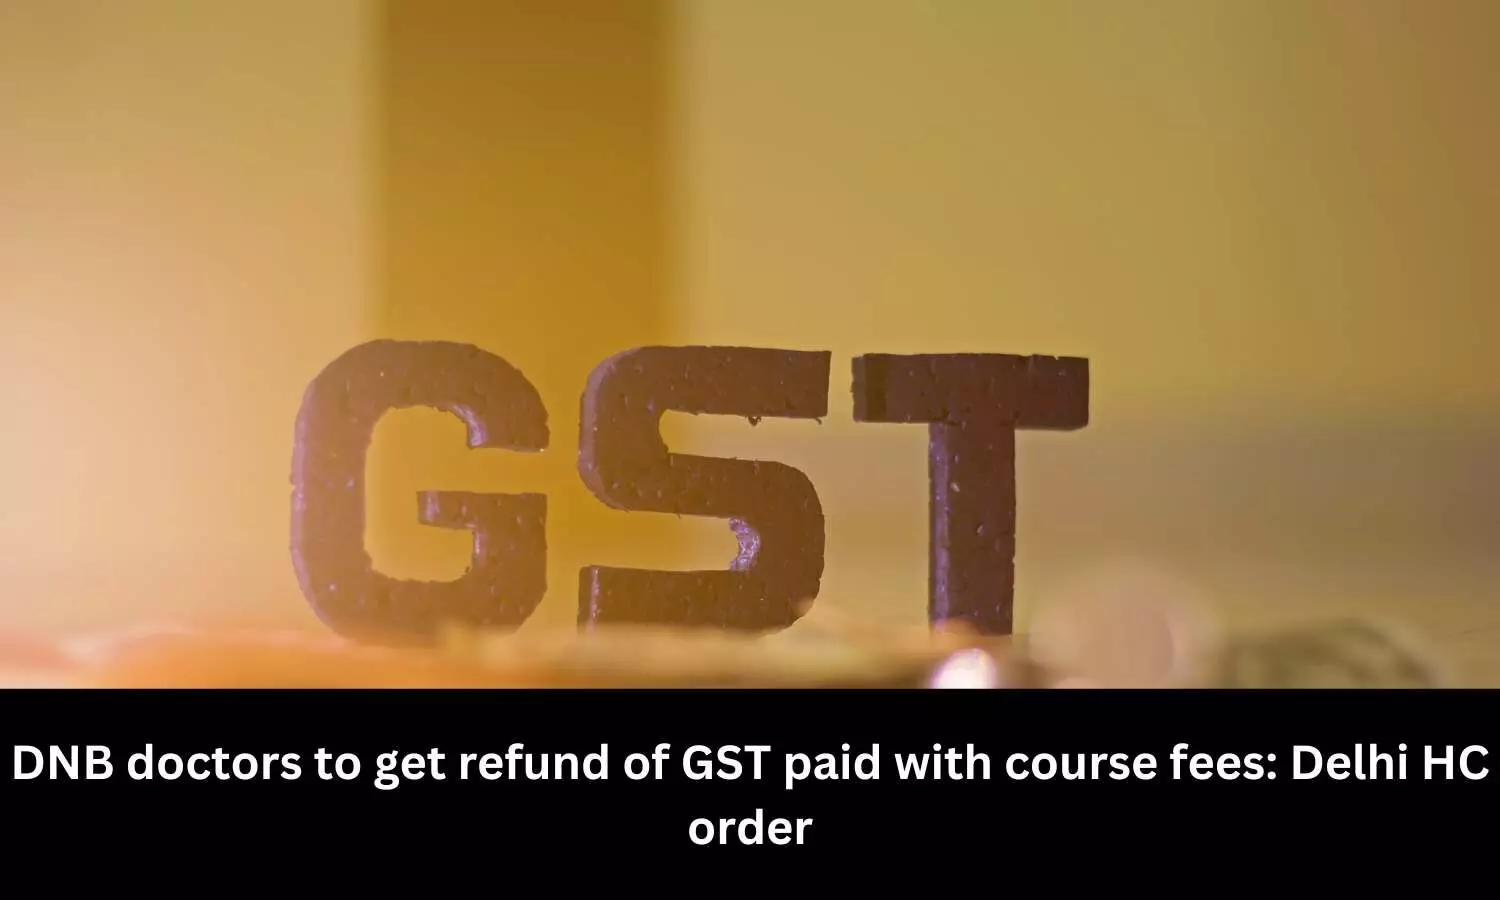 DNB doctors to get refund of GST paid with course fees: Delhi HC order